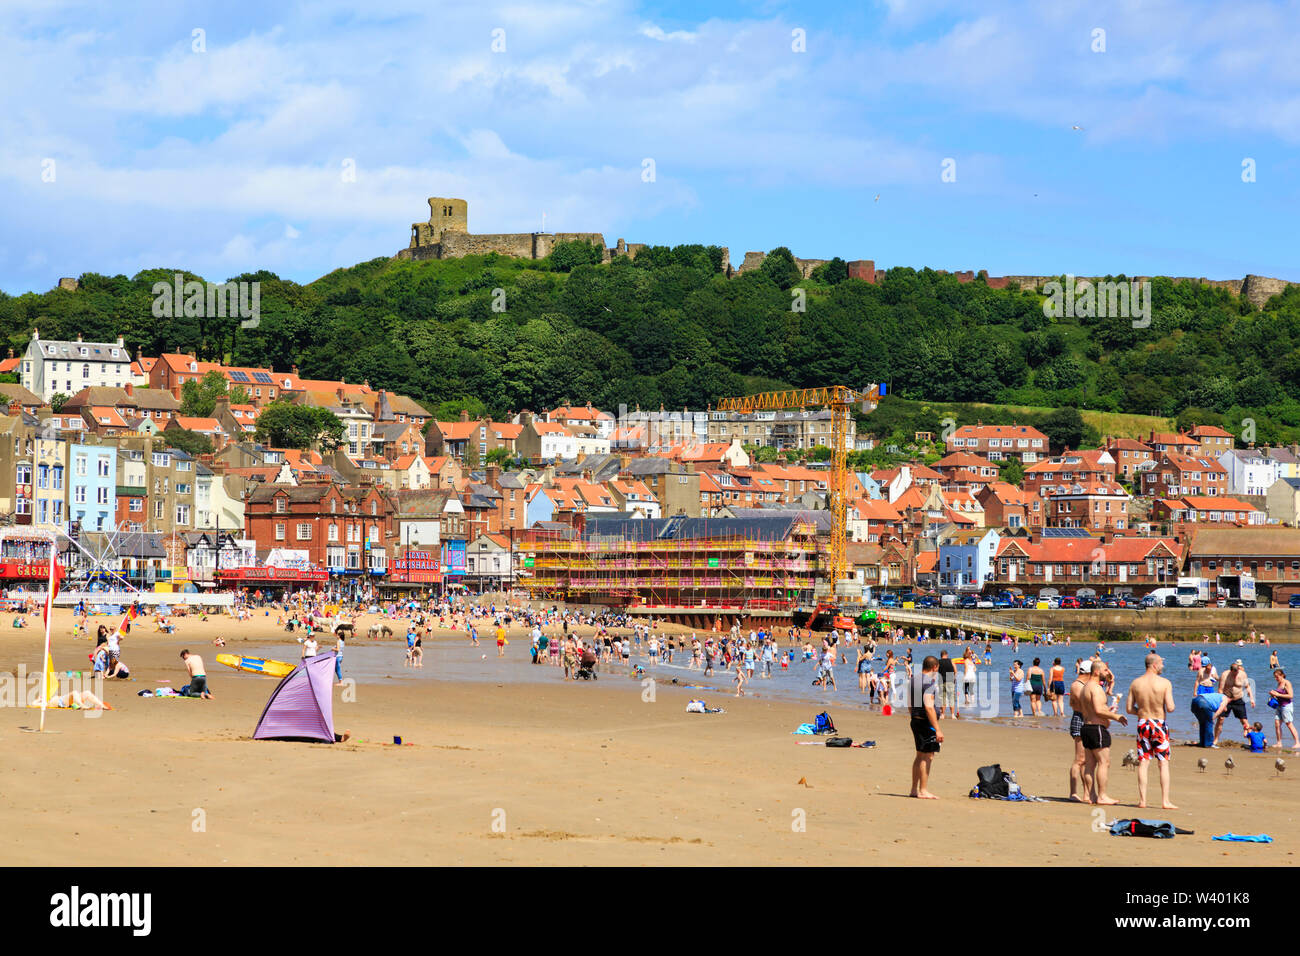 Scarborough beach and castle, South Yorkshire, England,  on a warm, sunny day. Stock Photo